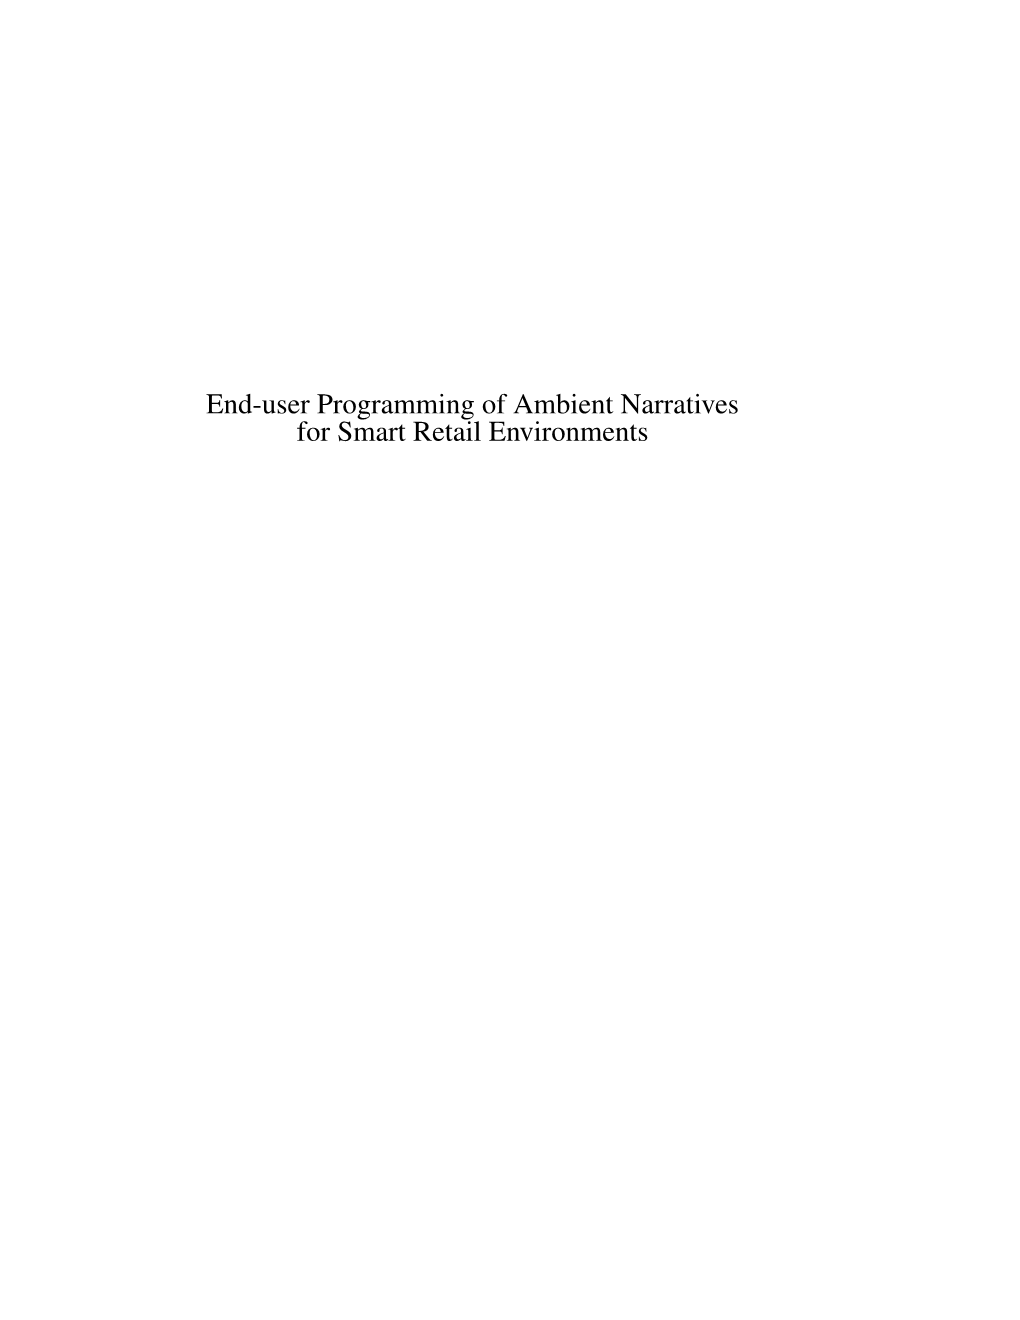 End-User Programming of Ambient Narratives for Smart Retail Environments ISBN 978-90-386-1527-1